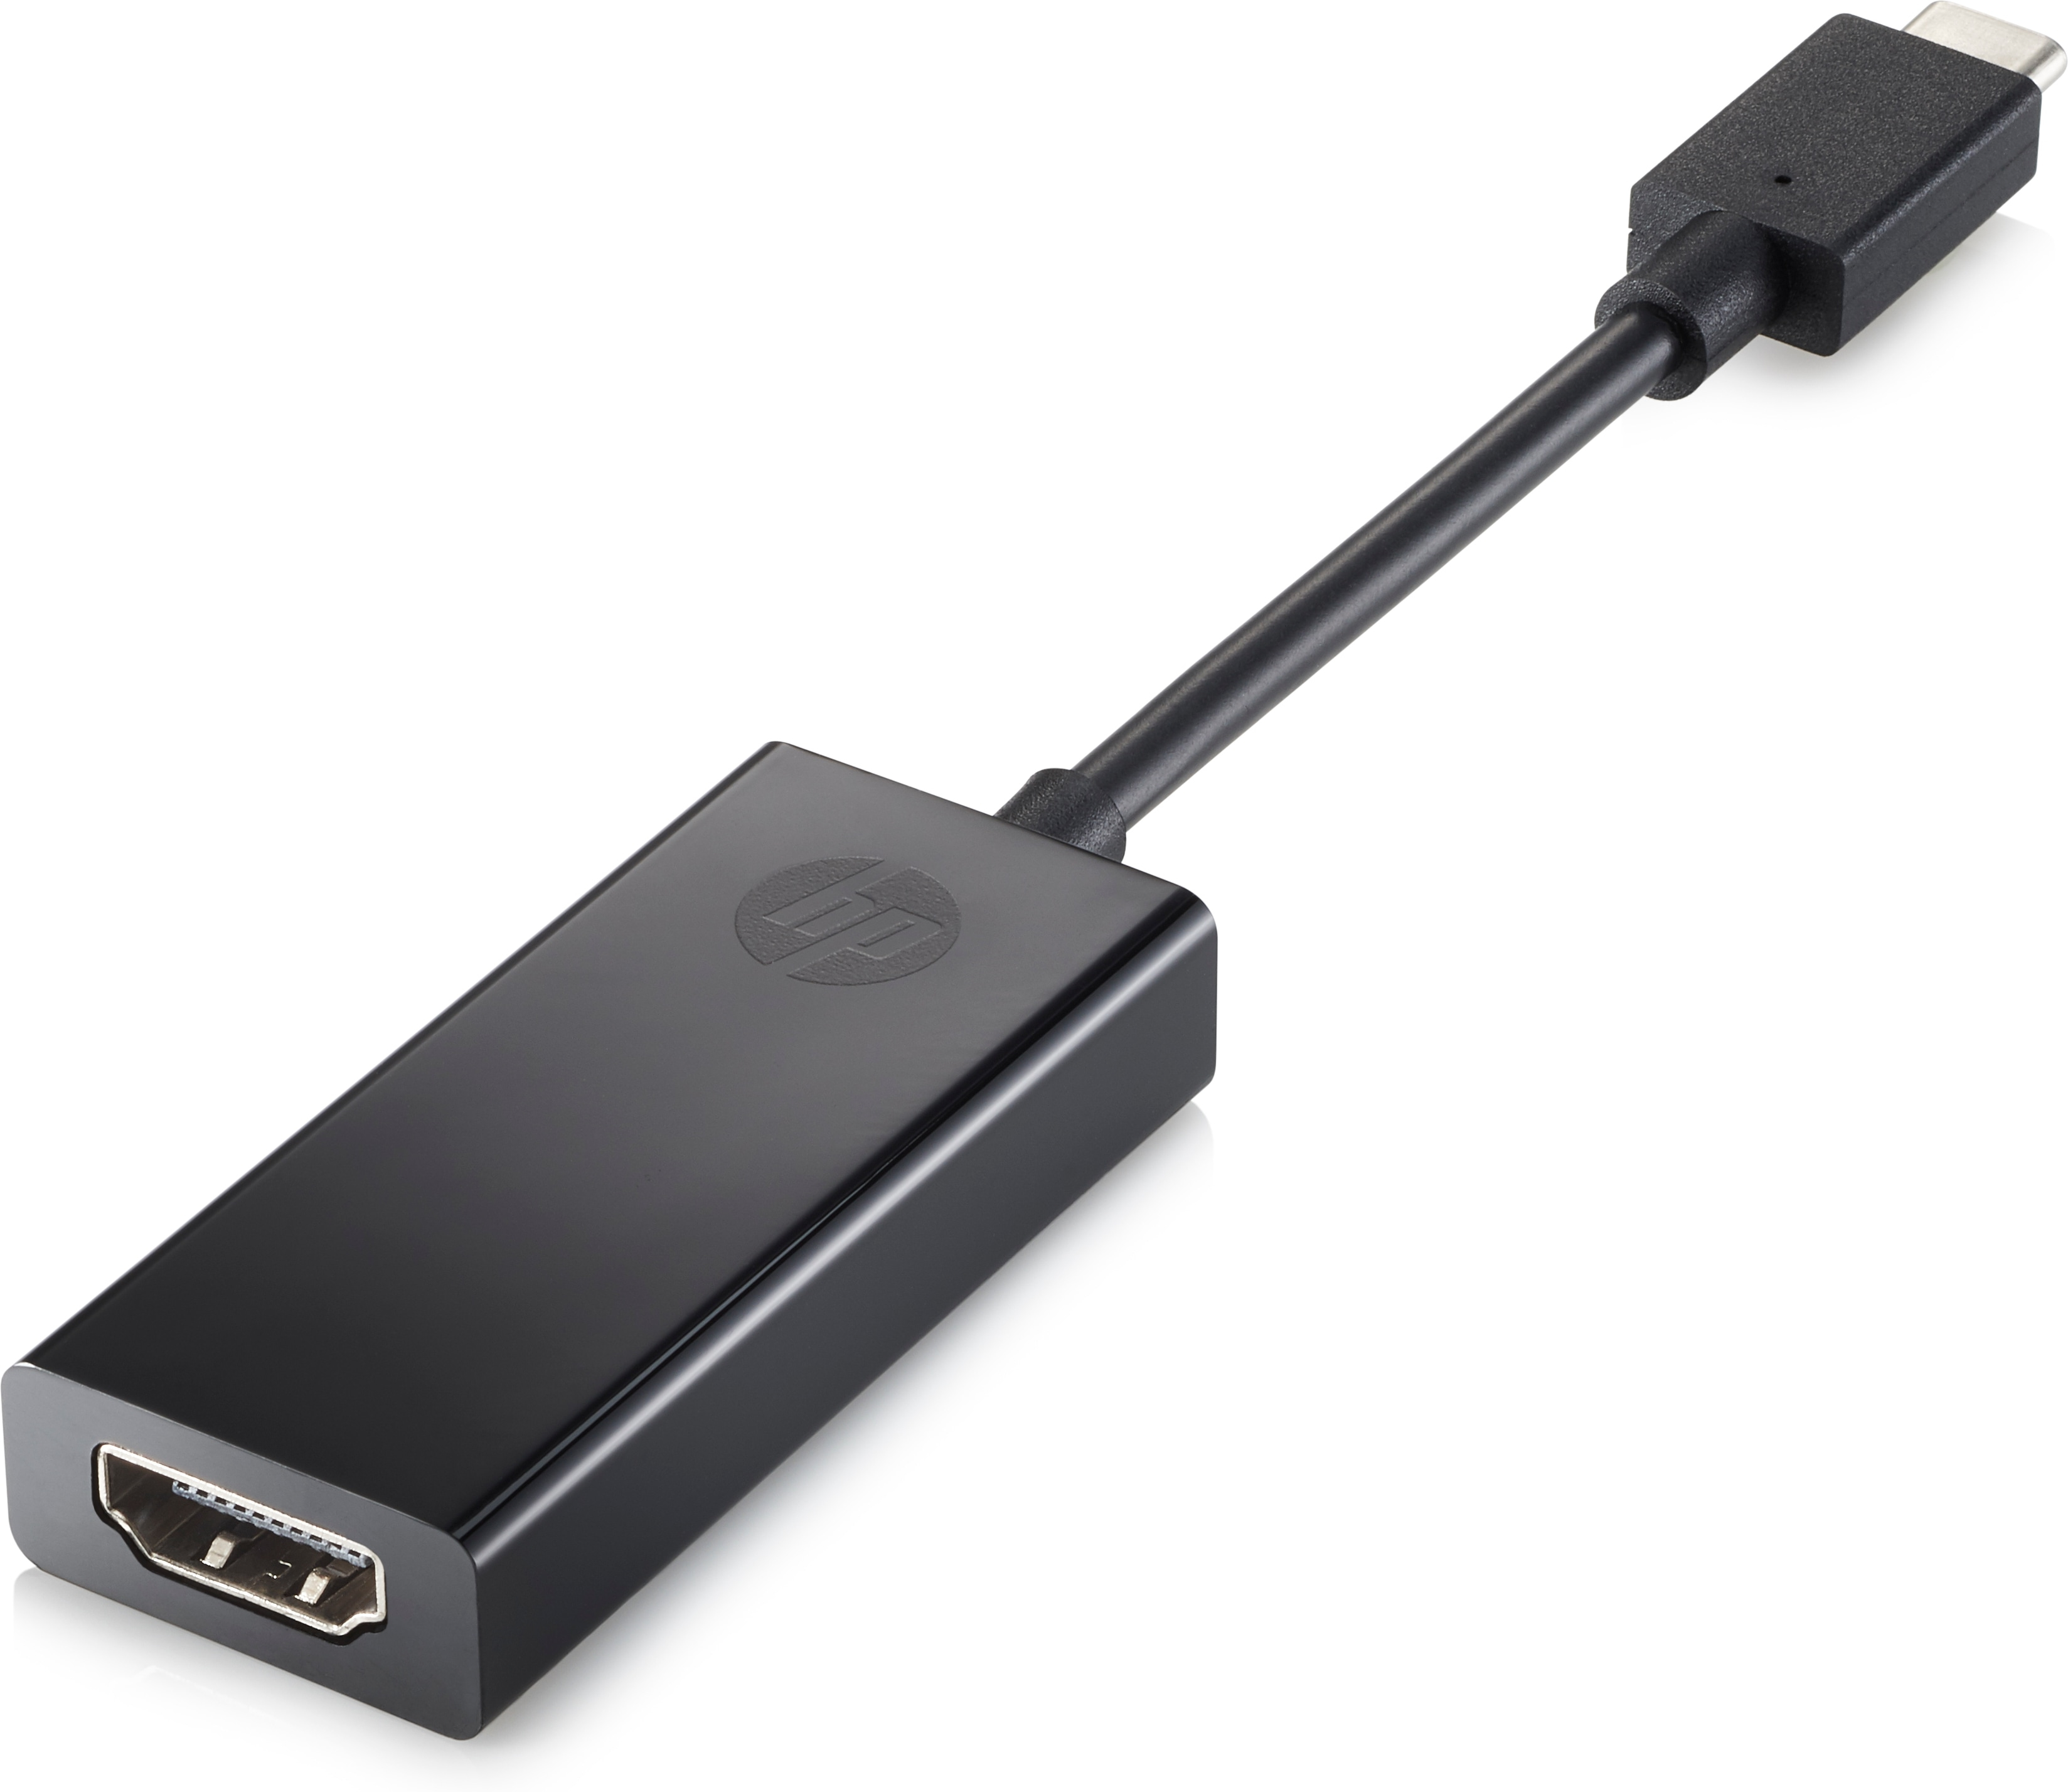  USB-C to HDMI 2.0 Adapter